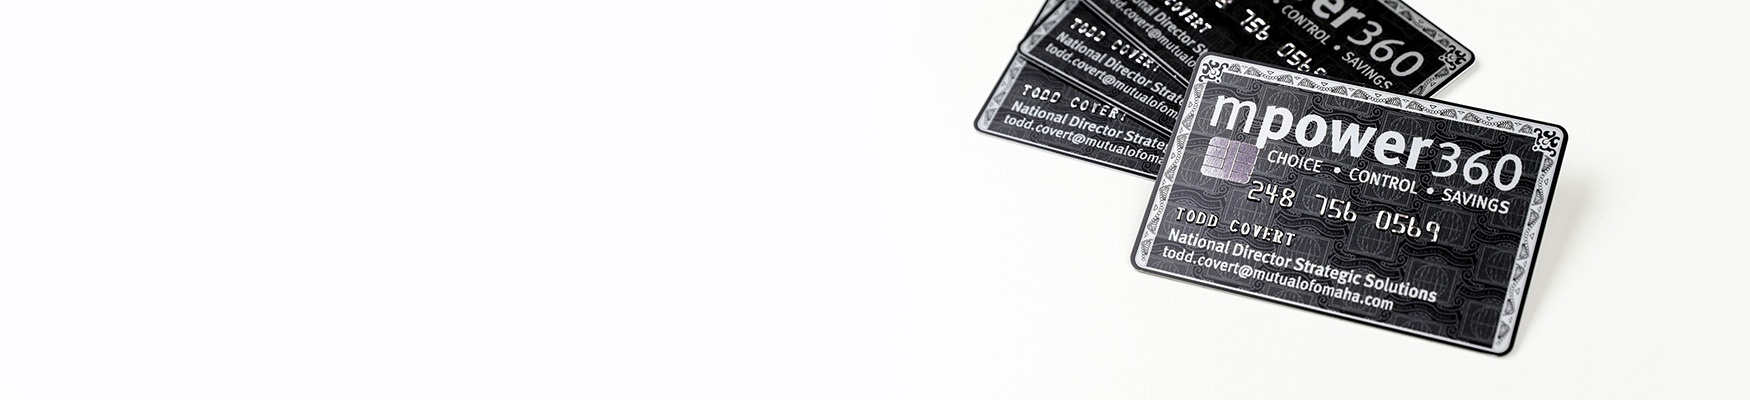 AMEX Black Card Style Smart Card with a Foil ICC Chip